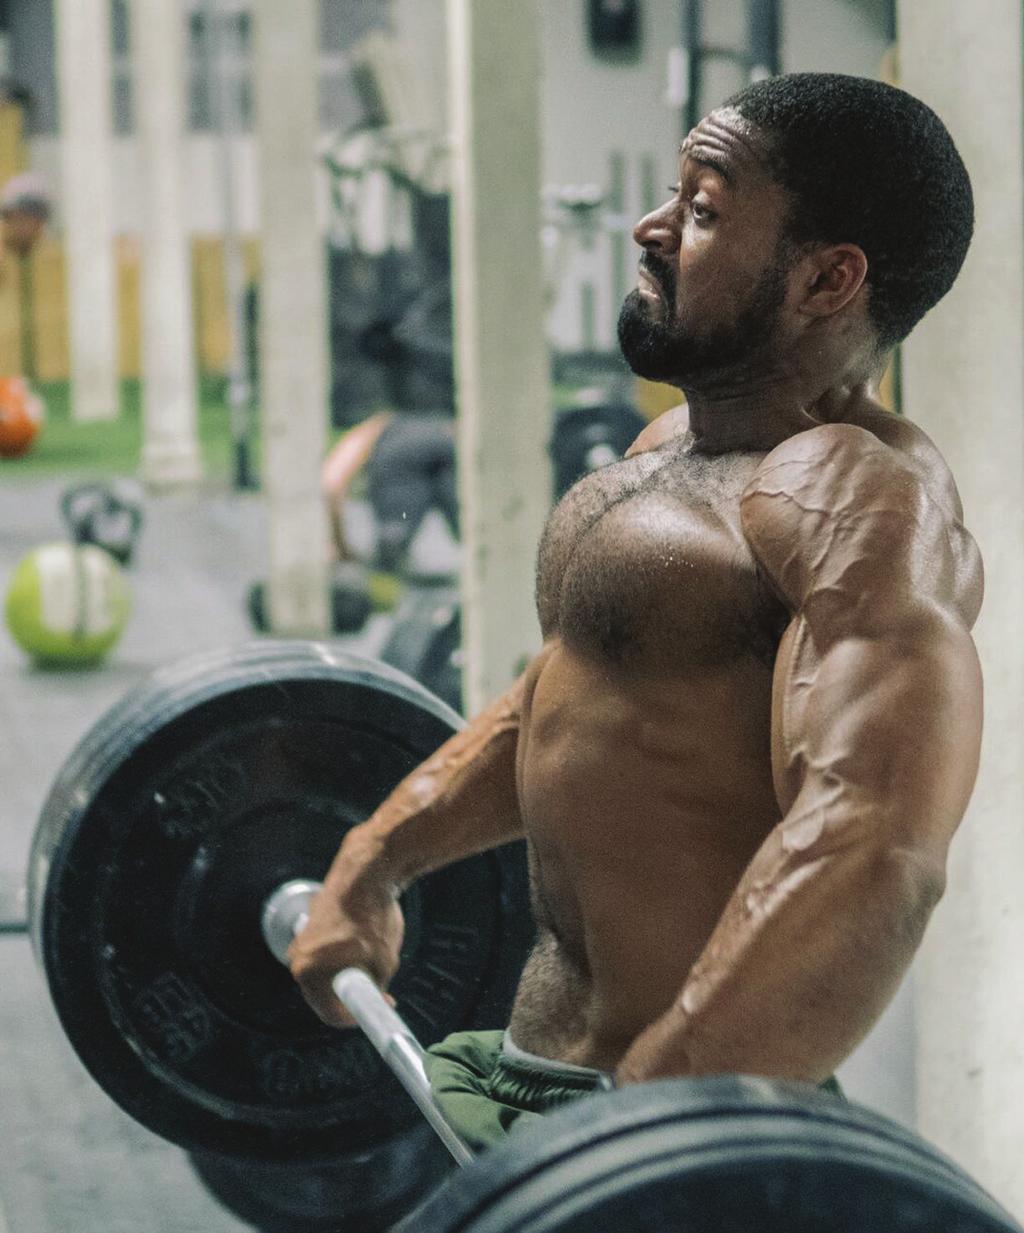 THE FITNESS ATHLETE'S GUIDE TO BULKING FOR STRENGTH A 6-Week Program